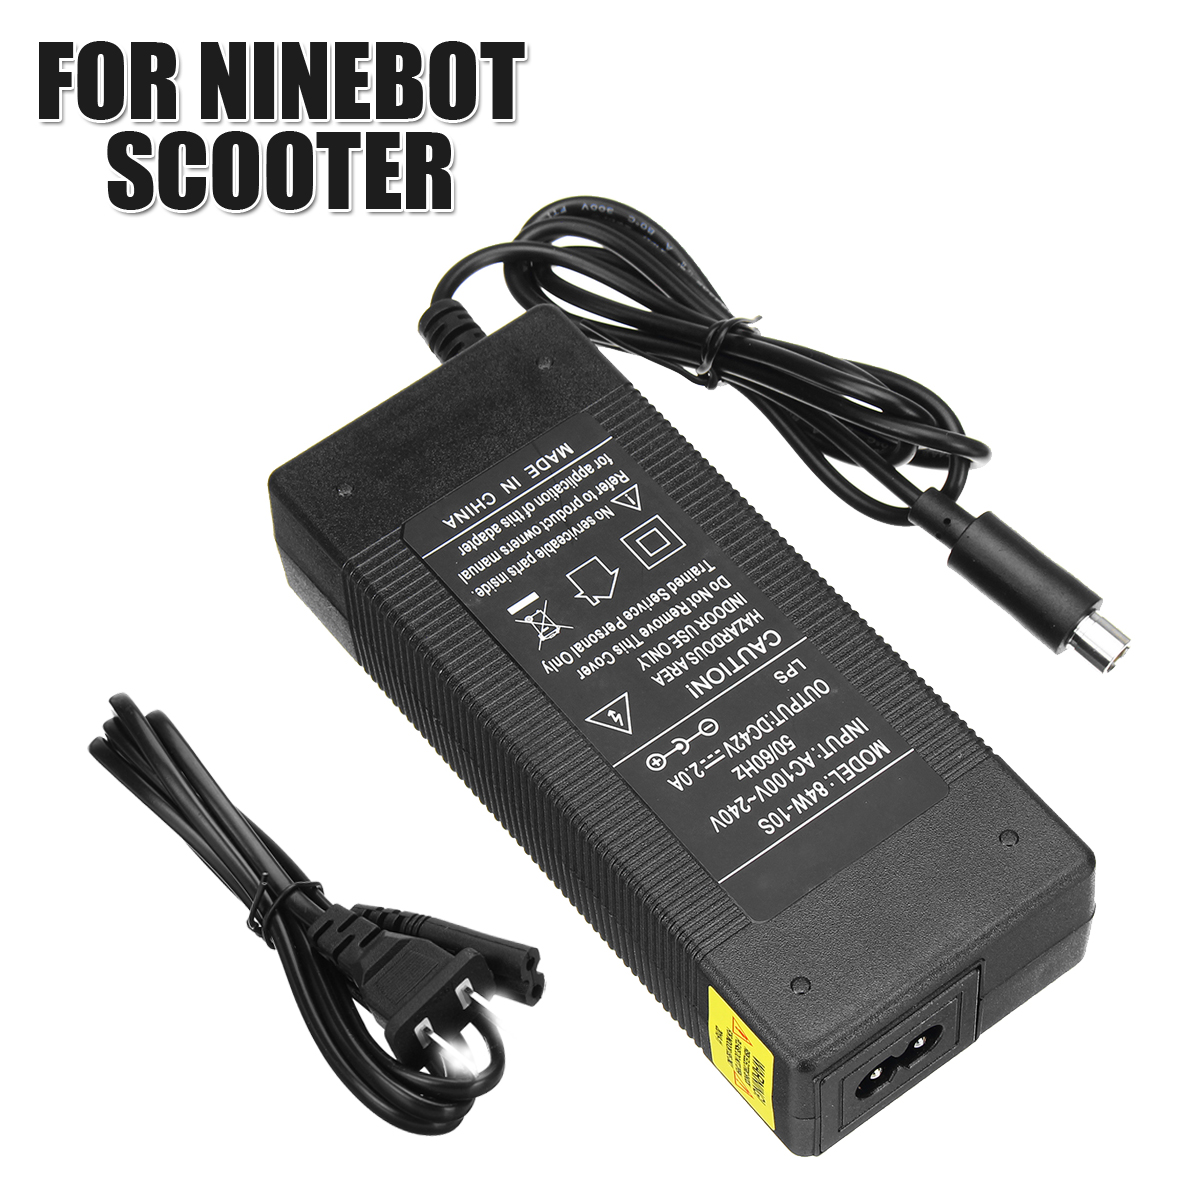 DC42V-17A-Lithium-Battery-Charger-Battery-Equipment-for-Scooter-For-Ninebot-Scooter-1417293-2